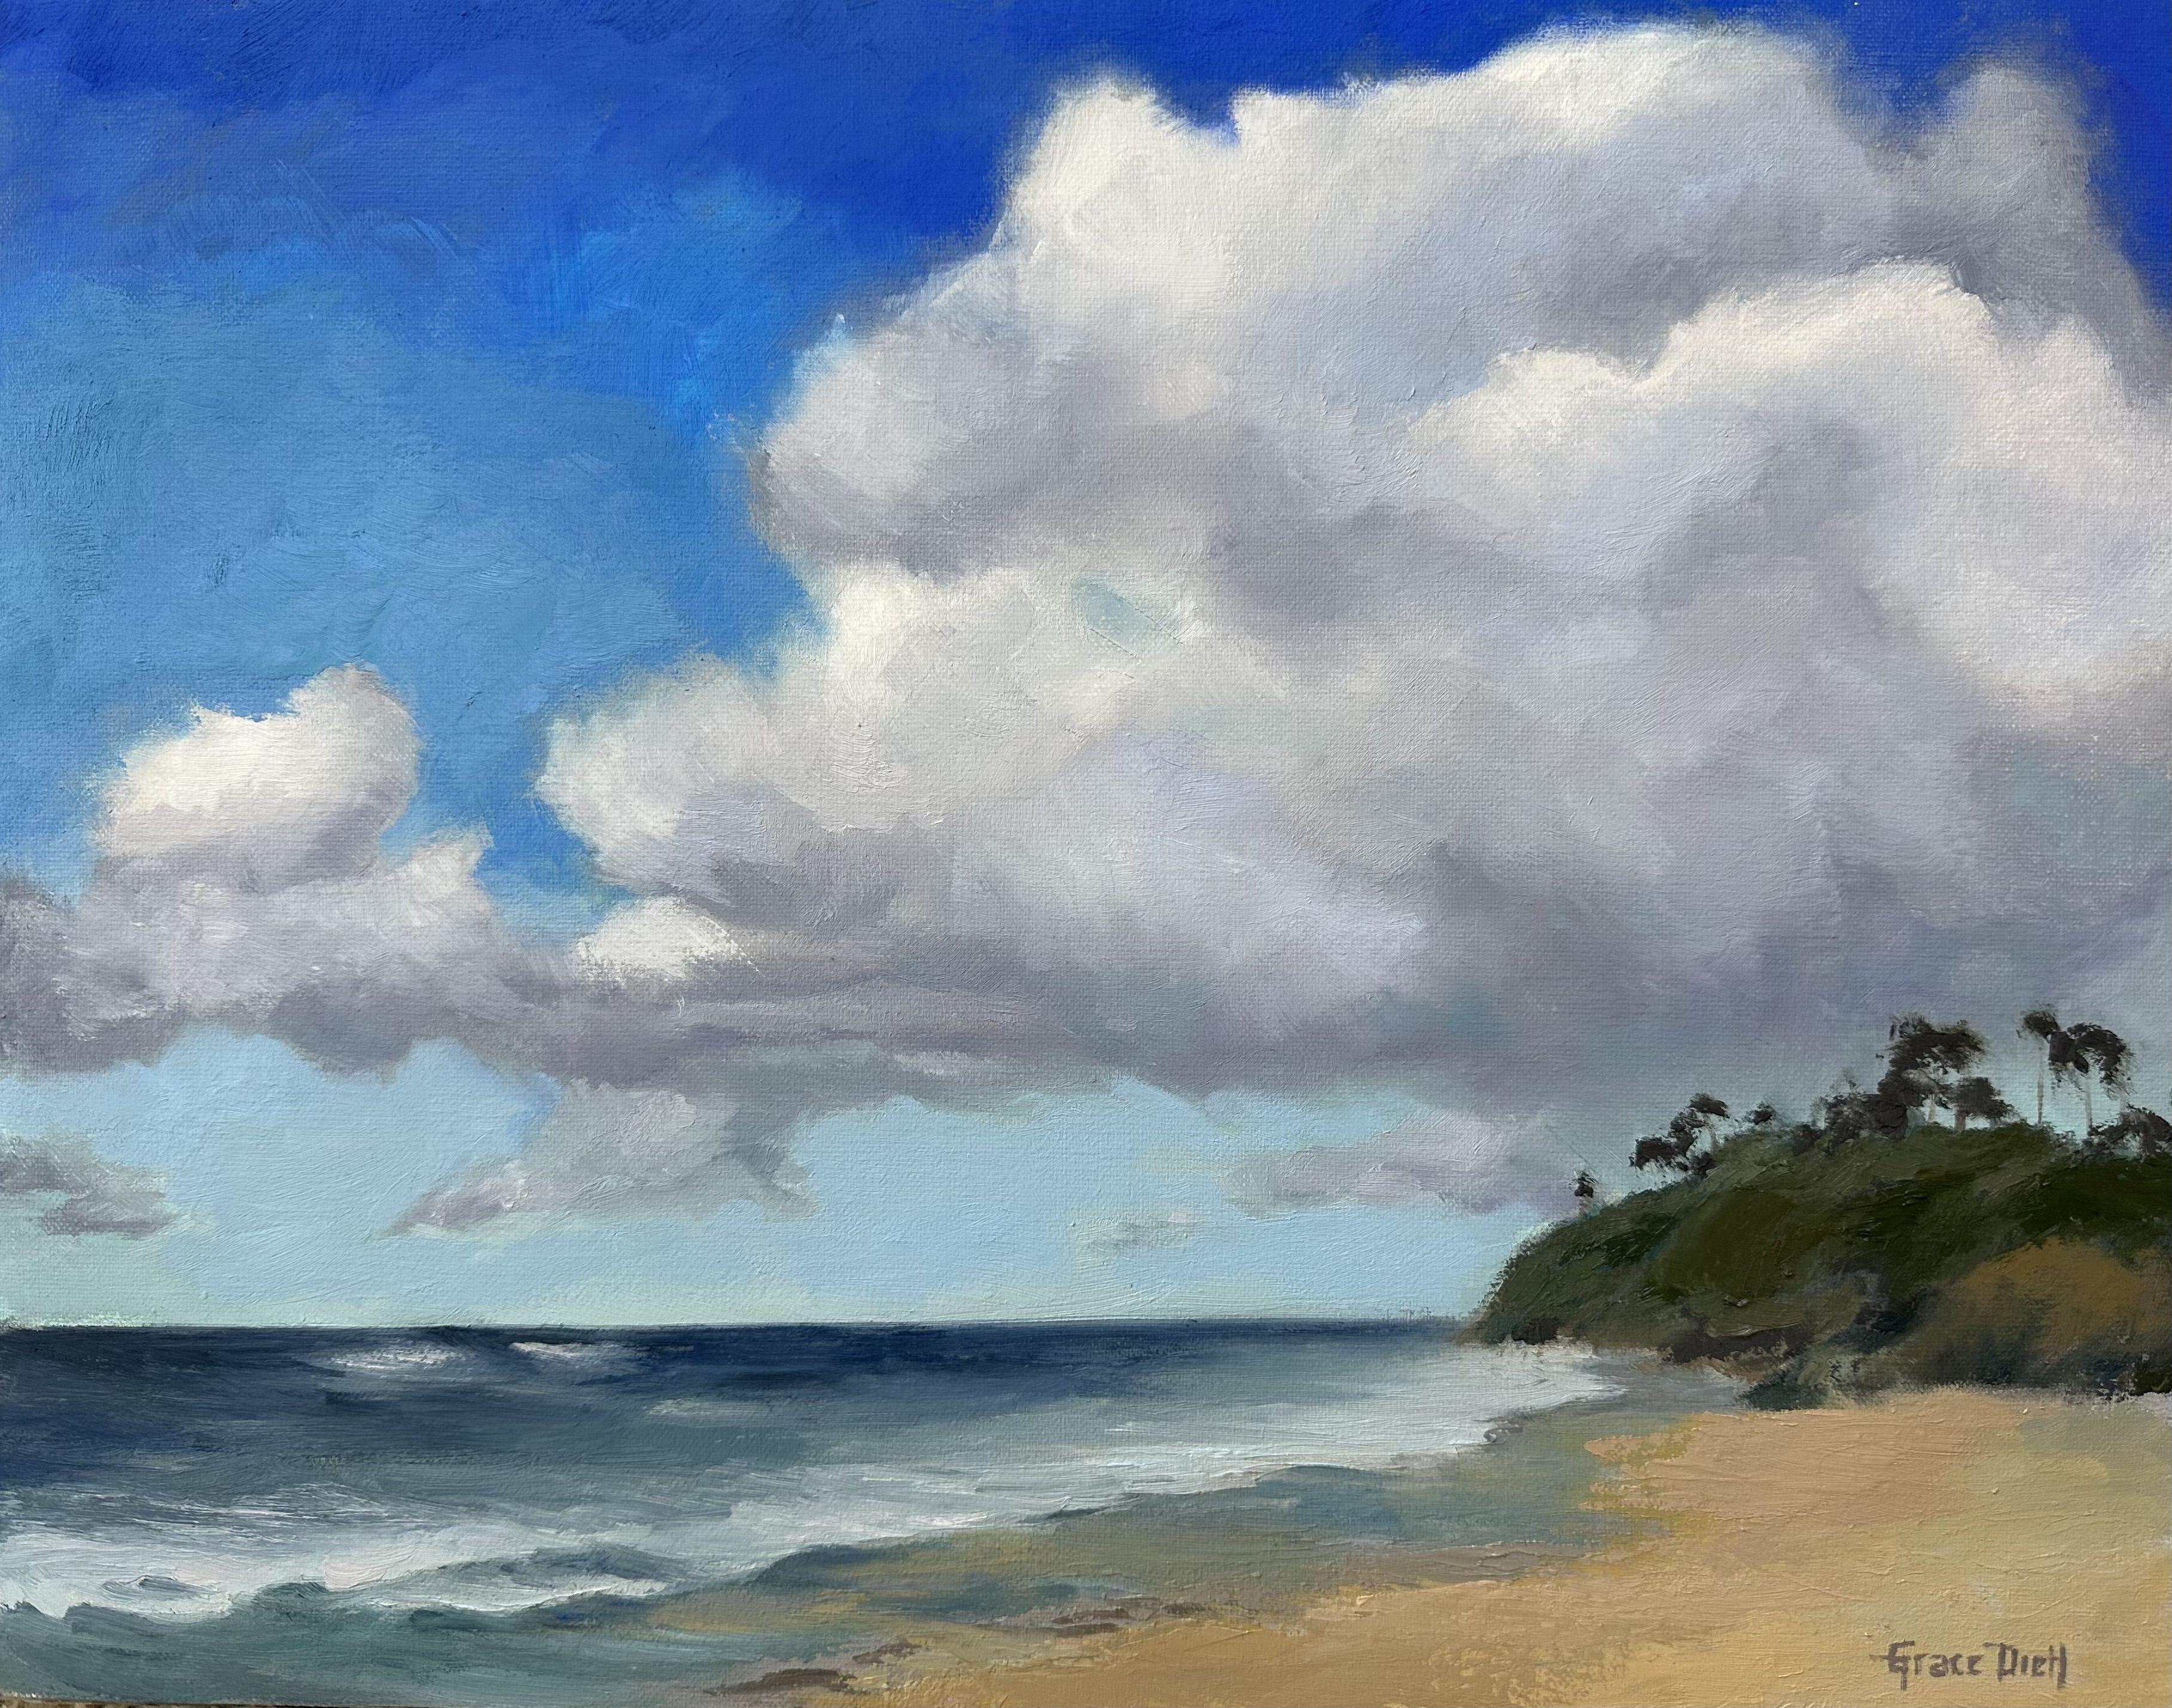 I was struck by awe-inspiring clouds over Laguna's ocean on the southern sea coast of California. Lately there have been a lot of storms and therefore the cloudscapes were majestic. :: Painting :: Impressionist :: This piece comes with an official